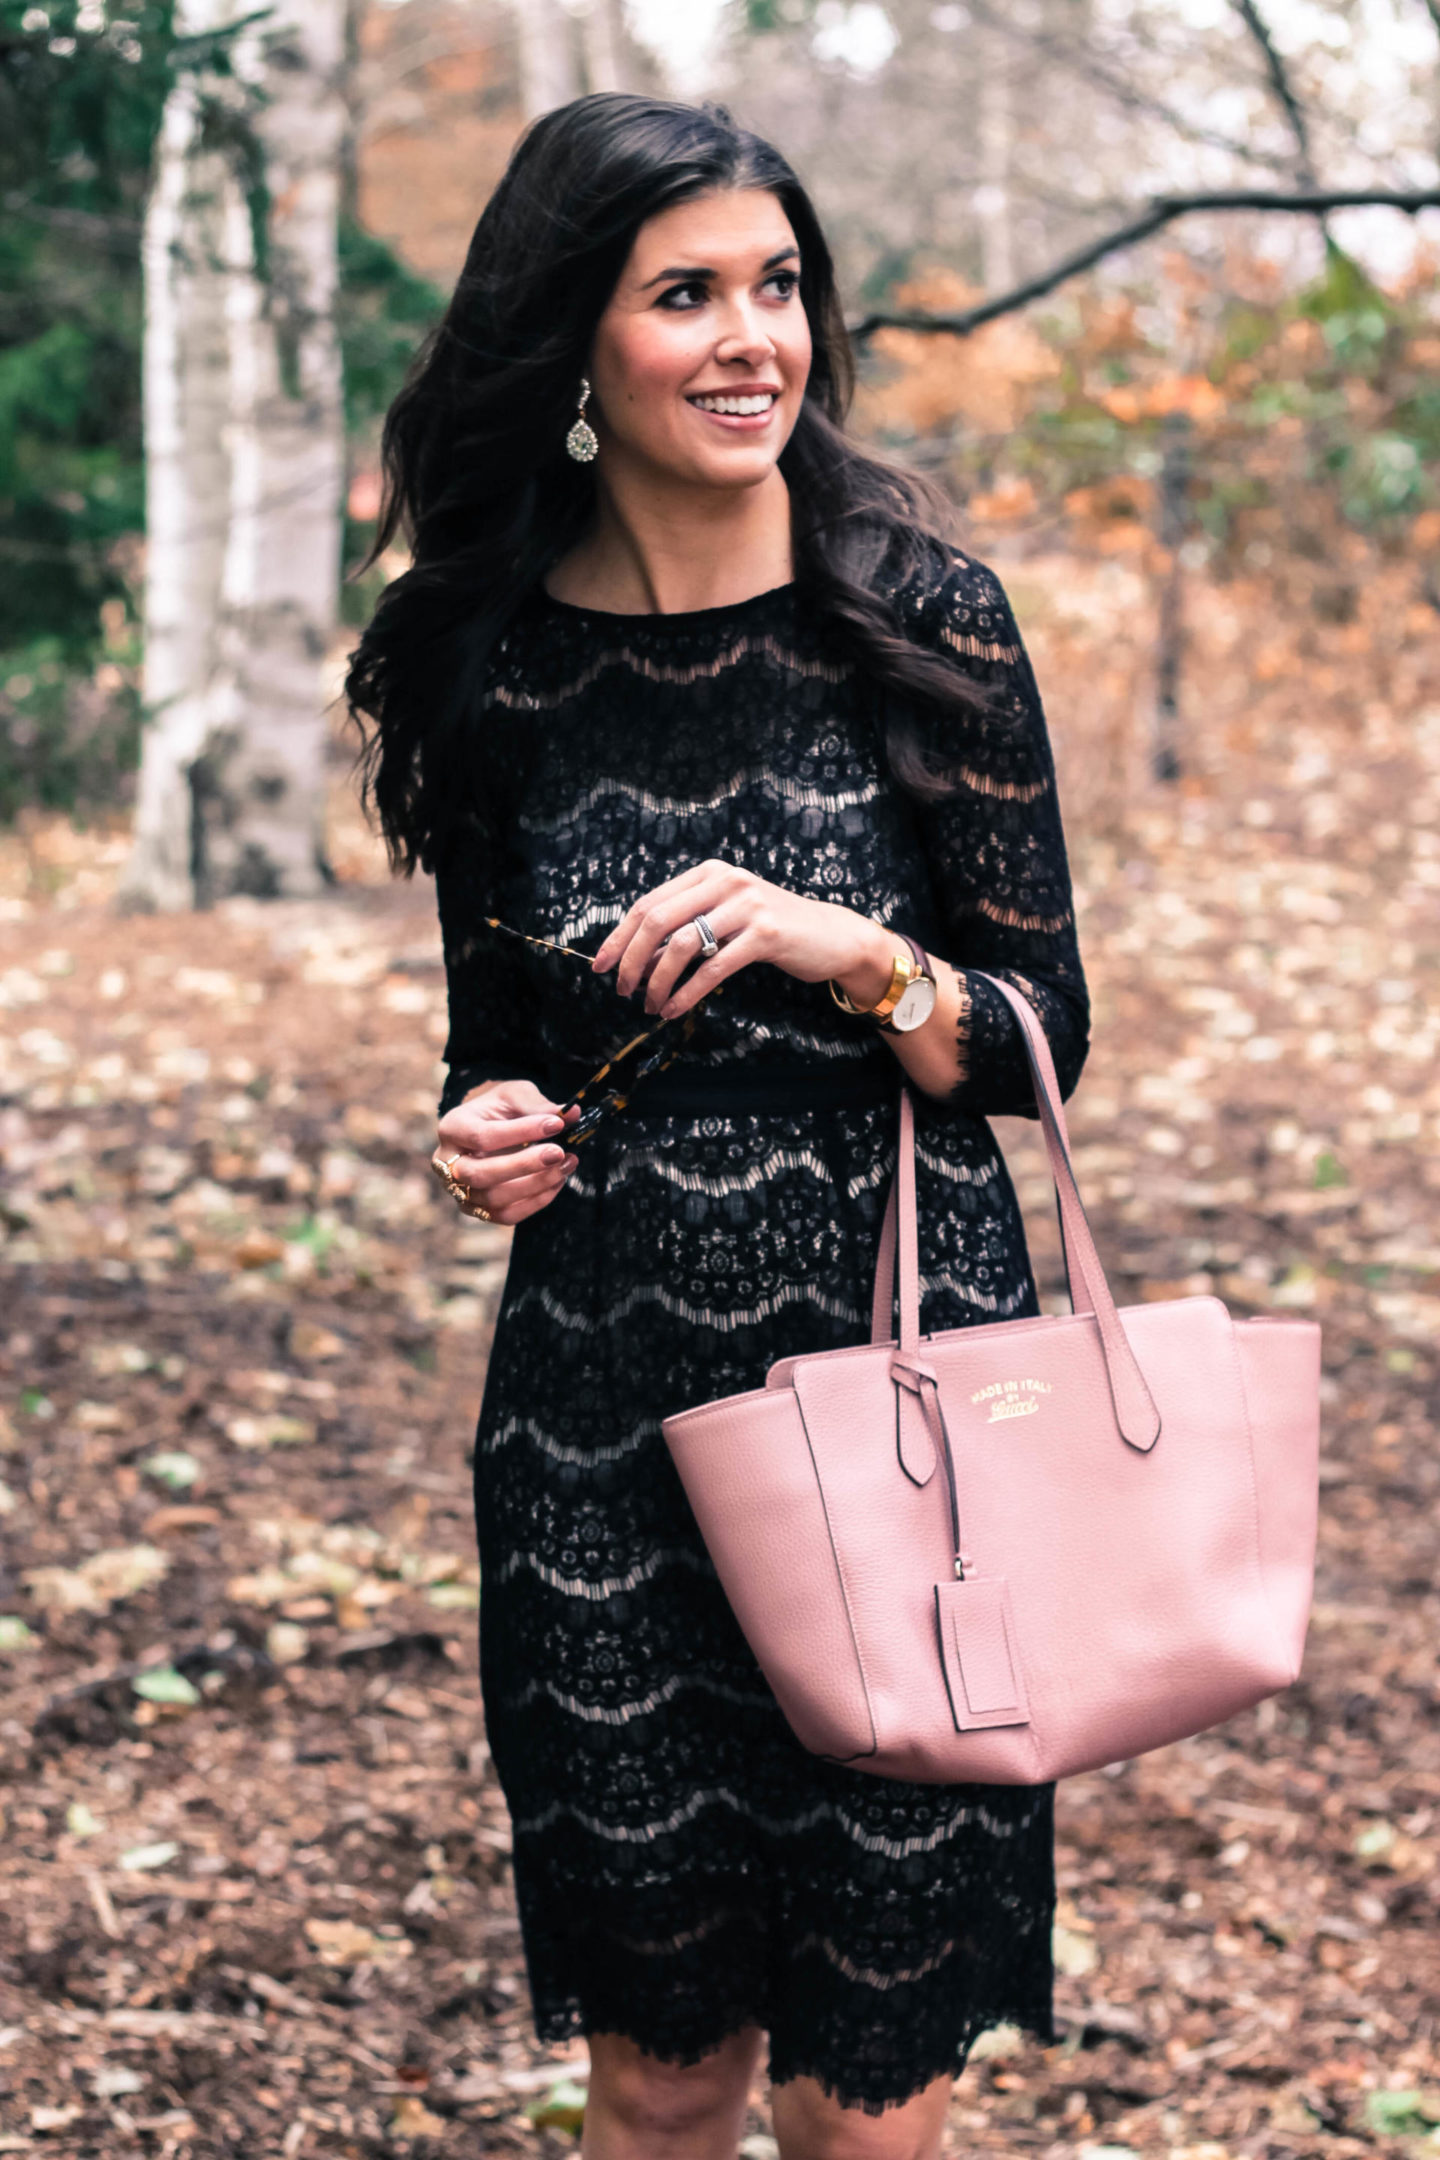 Black Lace Dress From Amazon - The Perfect Black Lace Midi Dress From Amazon by New York fashion blogger Style Waltz